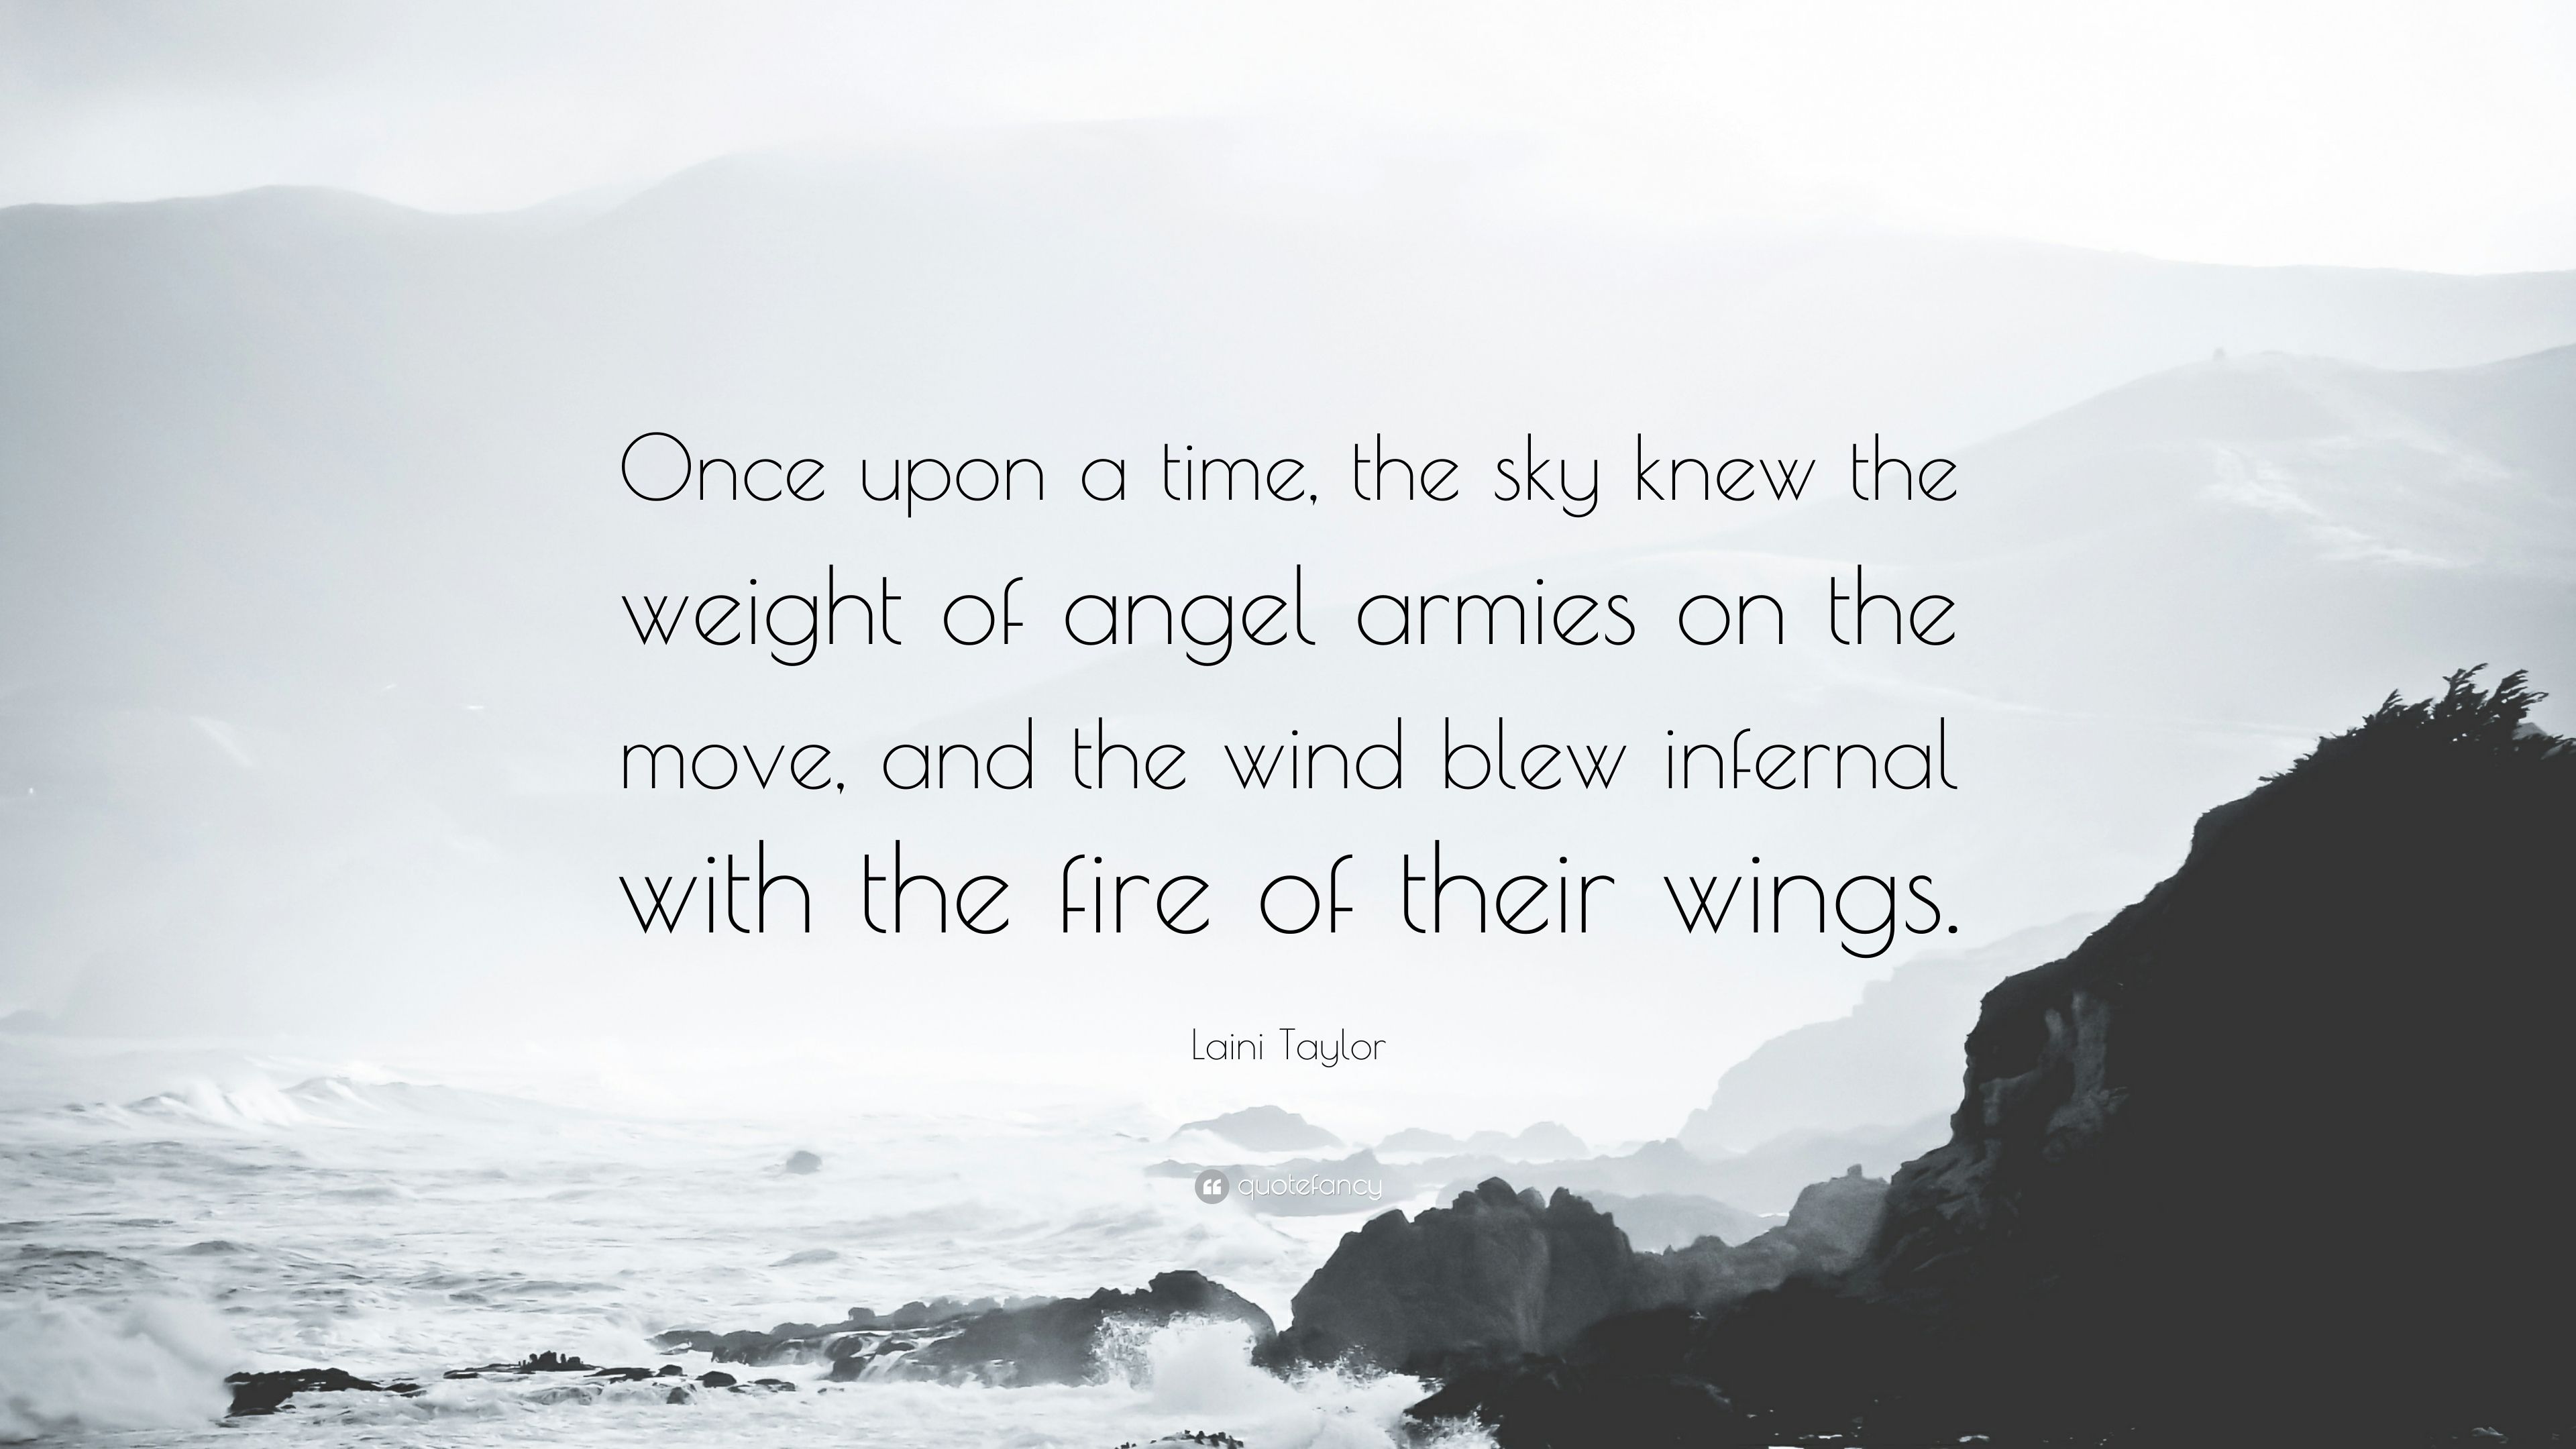 Laini Taylor Quote: “Once upon a time, the sky knew the weight of angel armies on the move, and the wind blew infernal with the fire of their.” (7 wallpaper)